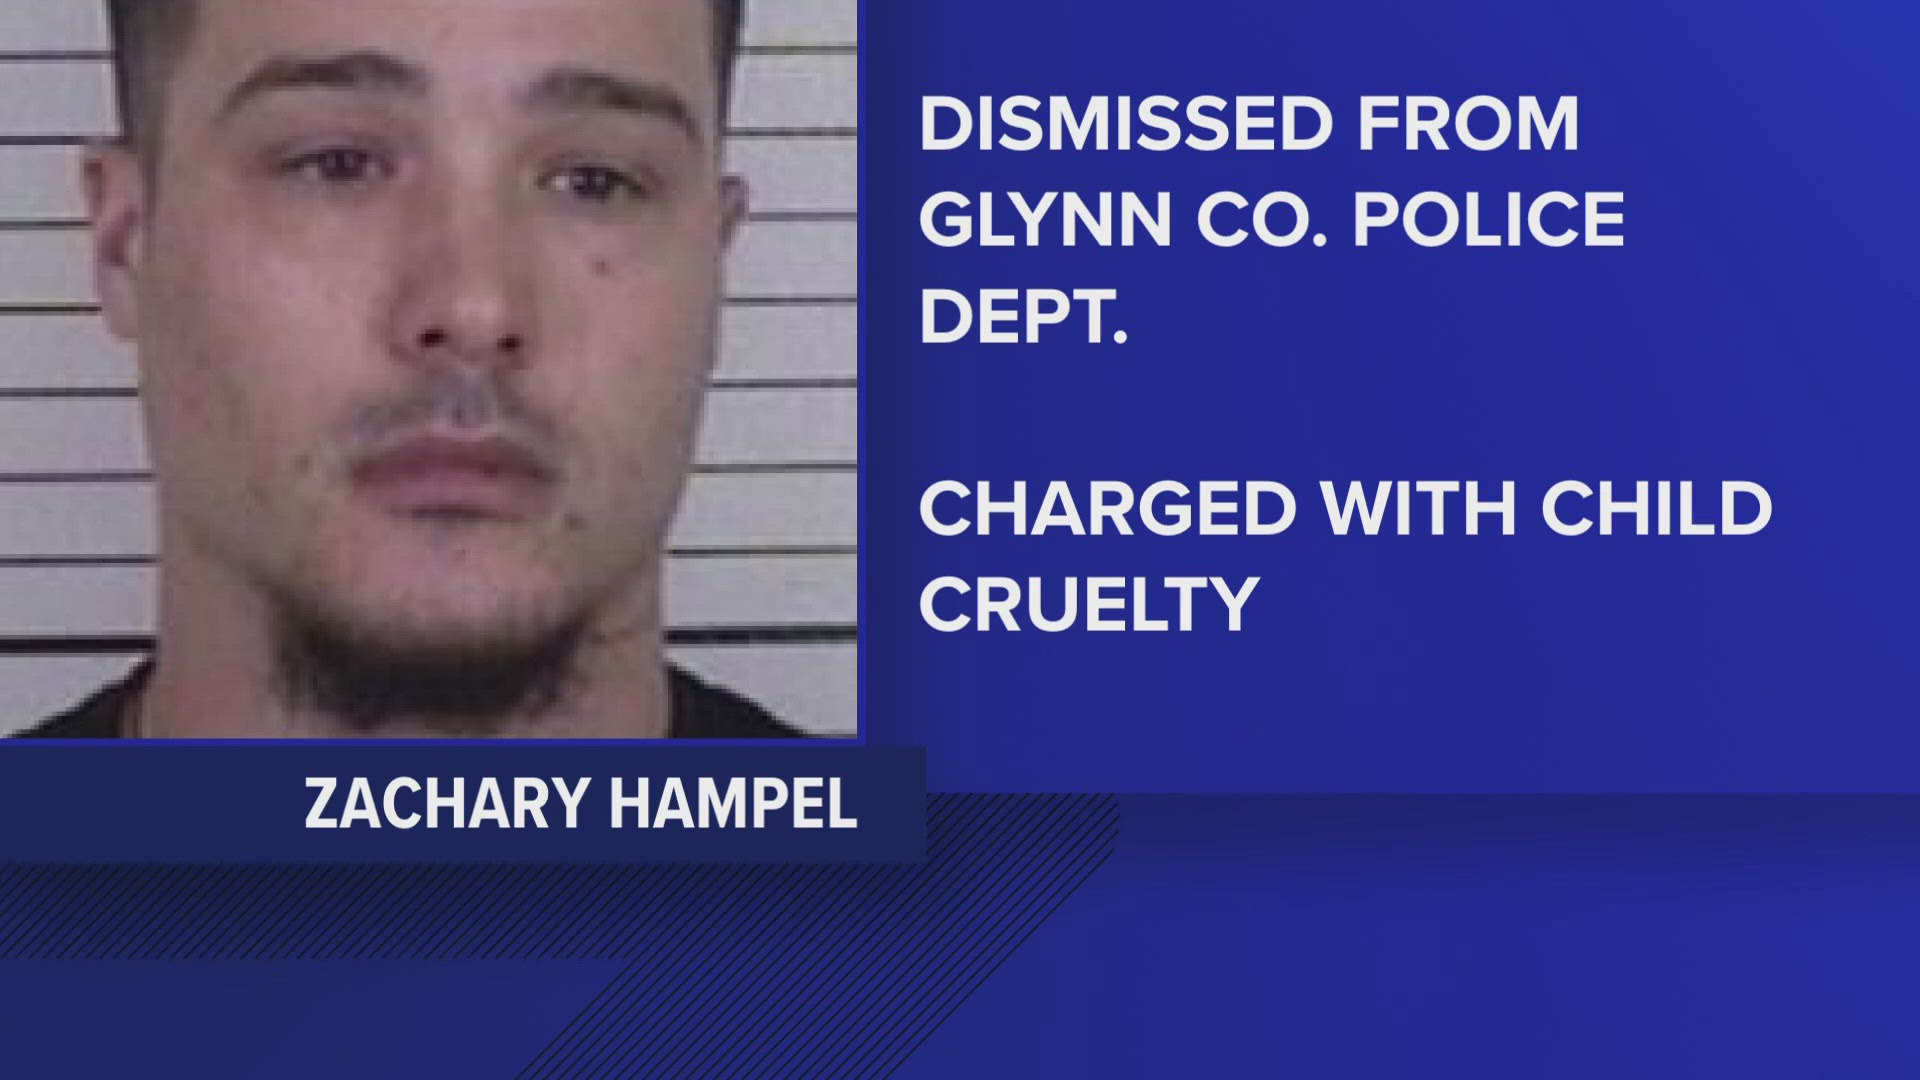 The Glynn County Police Department conducted an internal investigation and decided to dismiss Zachary Hempel.